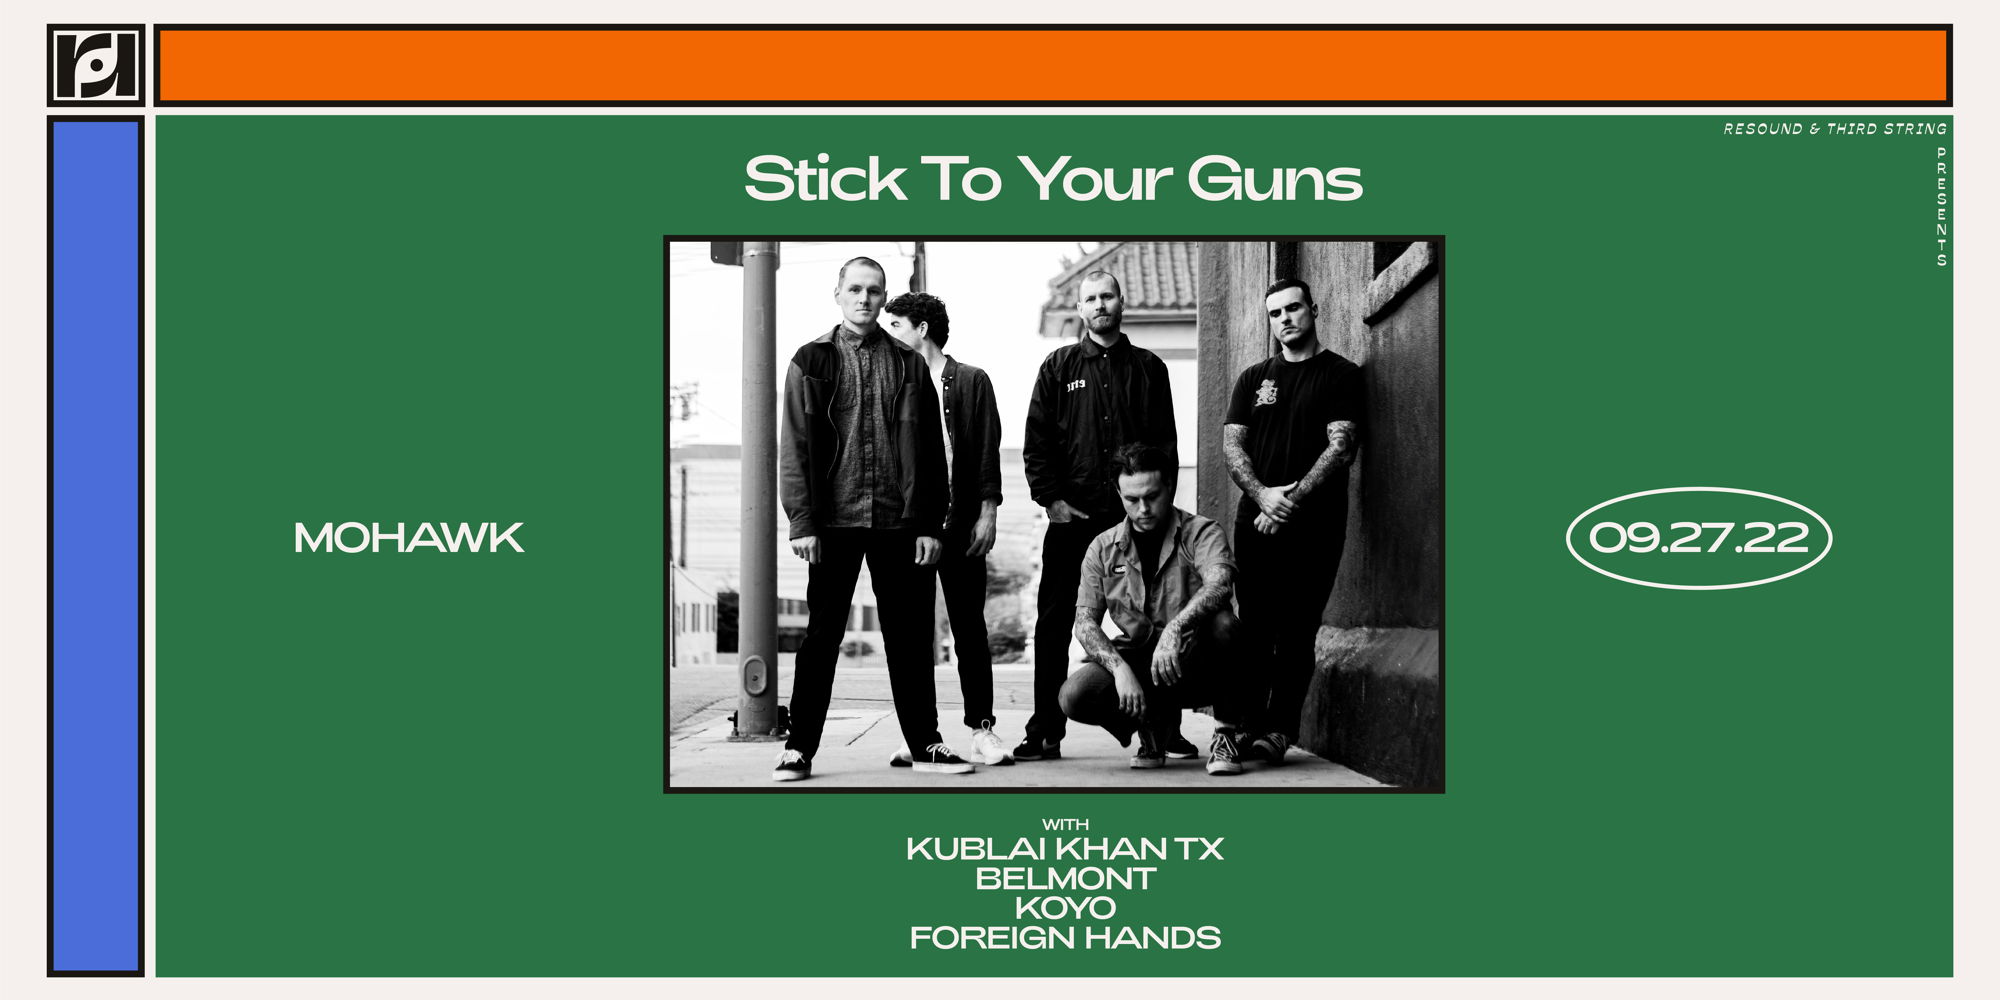 Stick To Your Guns w/ Kublain Khan TX, Belmont, Koyo and Foreign Hands at Mohawk - 9/27 promotional image